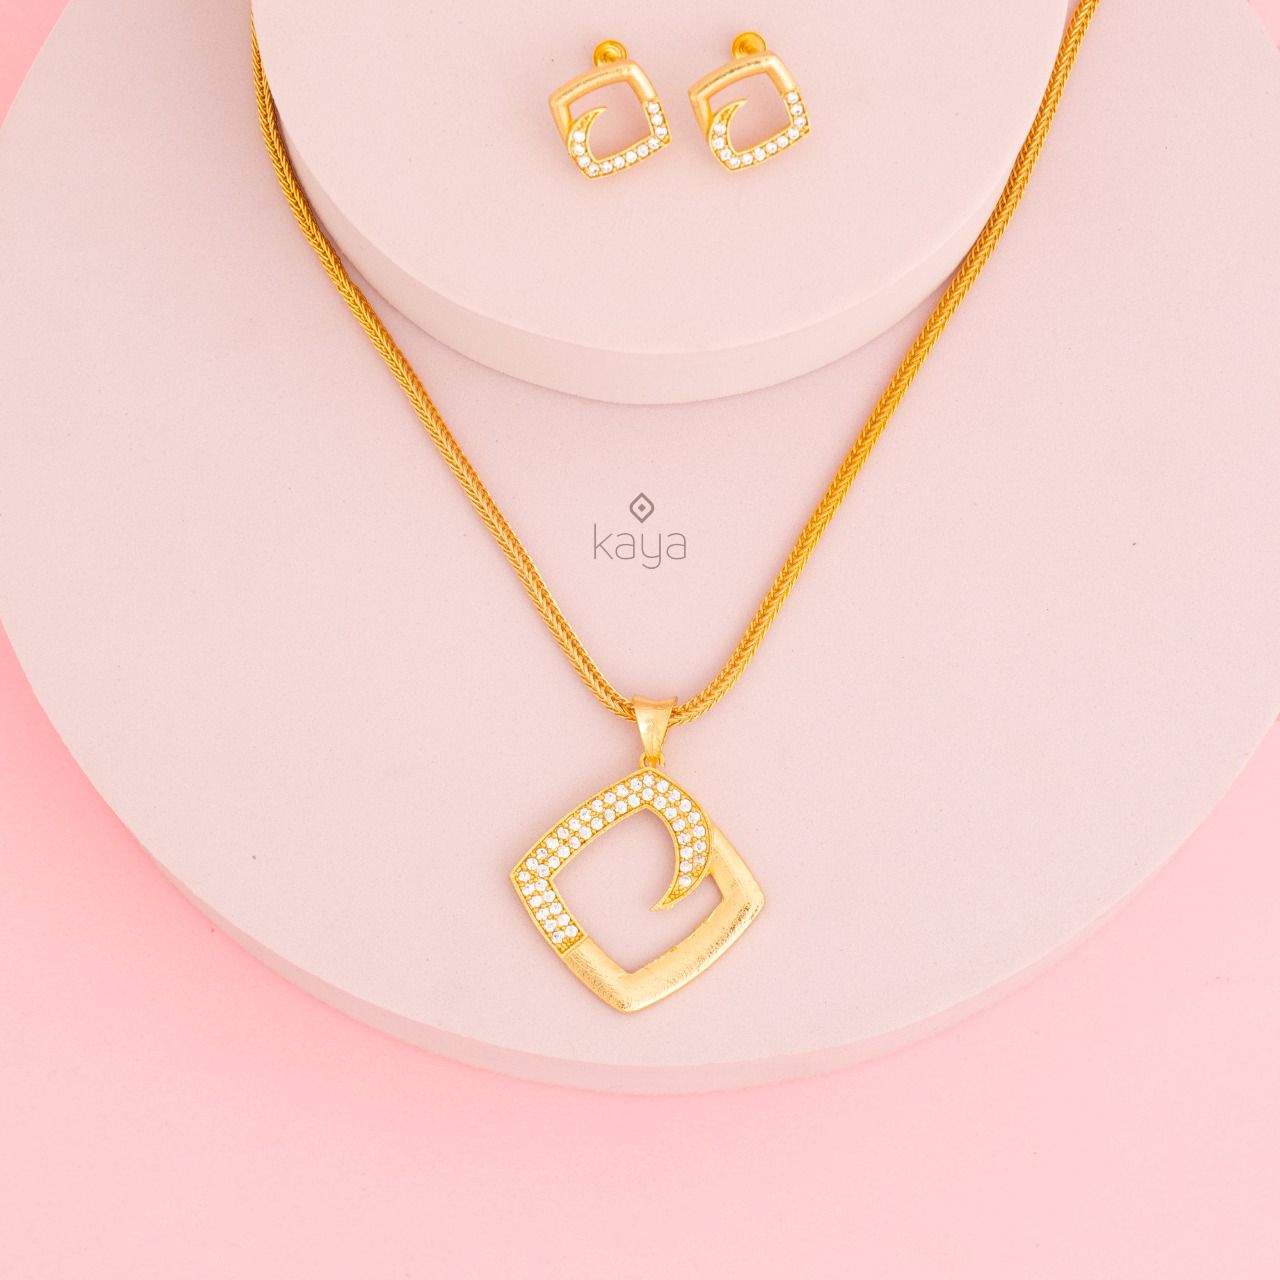 Simple pendant Necklace with Matching Earrings - SK10094